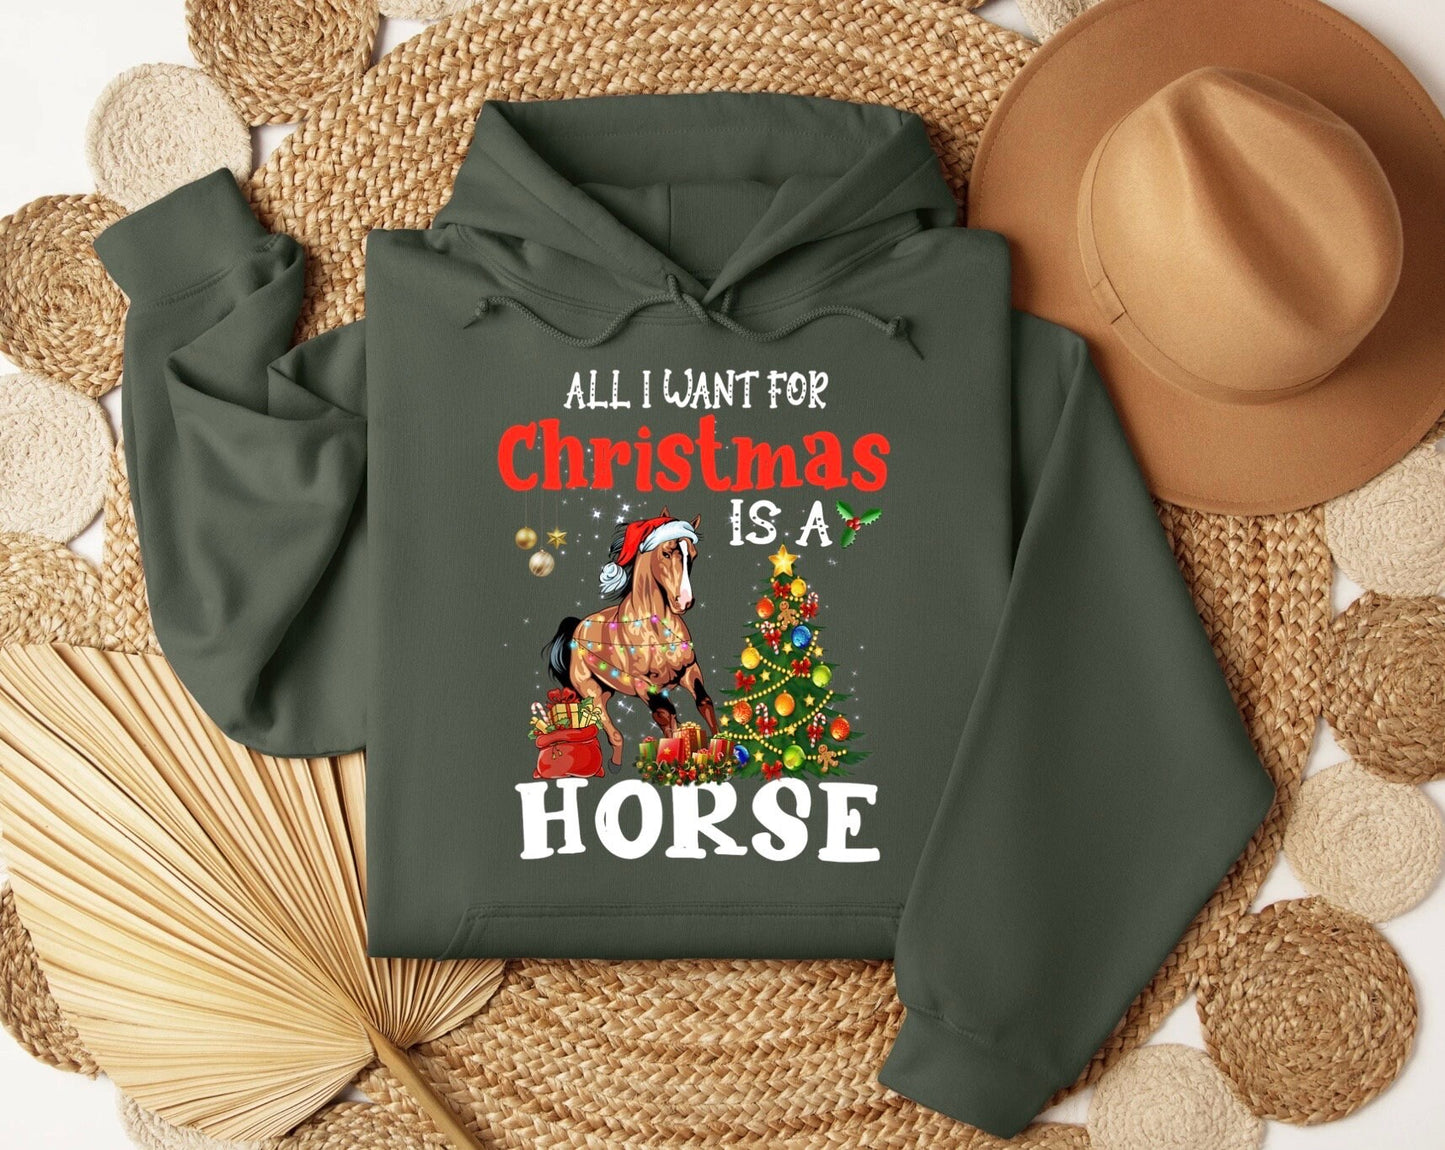 Horse Christmas Sweatshirt, Western Christmas Horse Shirt, Womens Christmas Sweater, Funny Christmas Shirt, Horse Lover Gift, All I want for